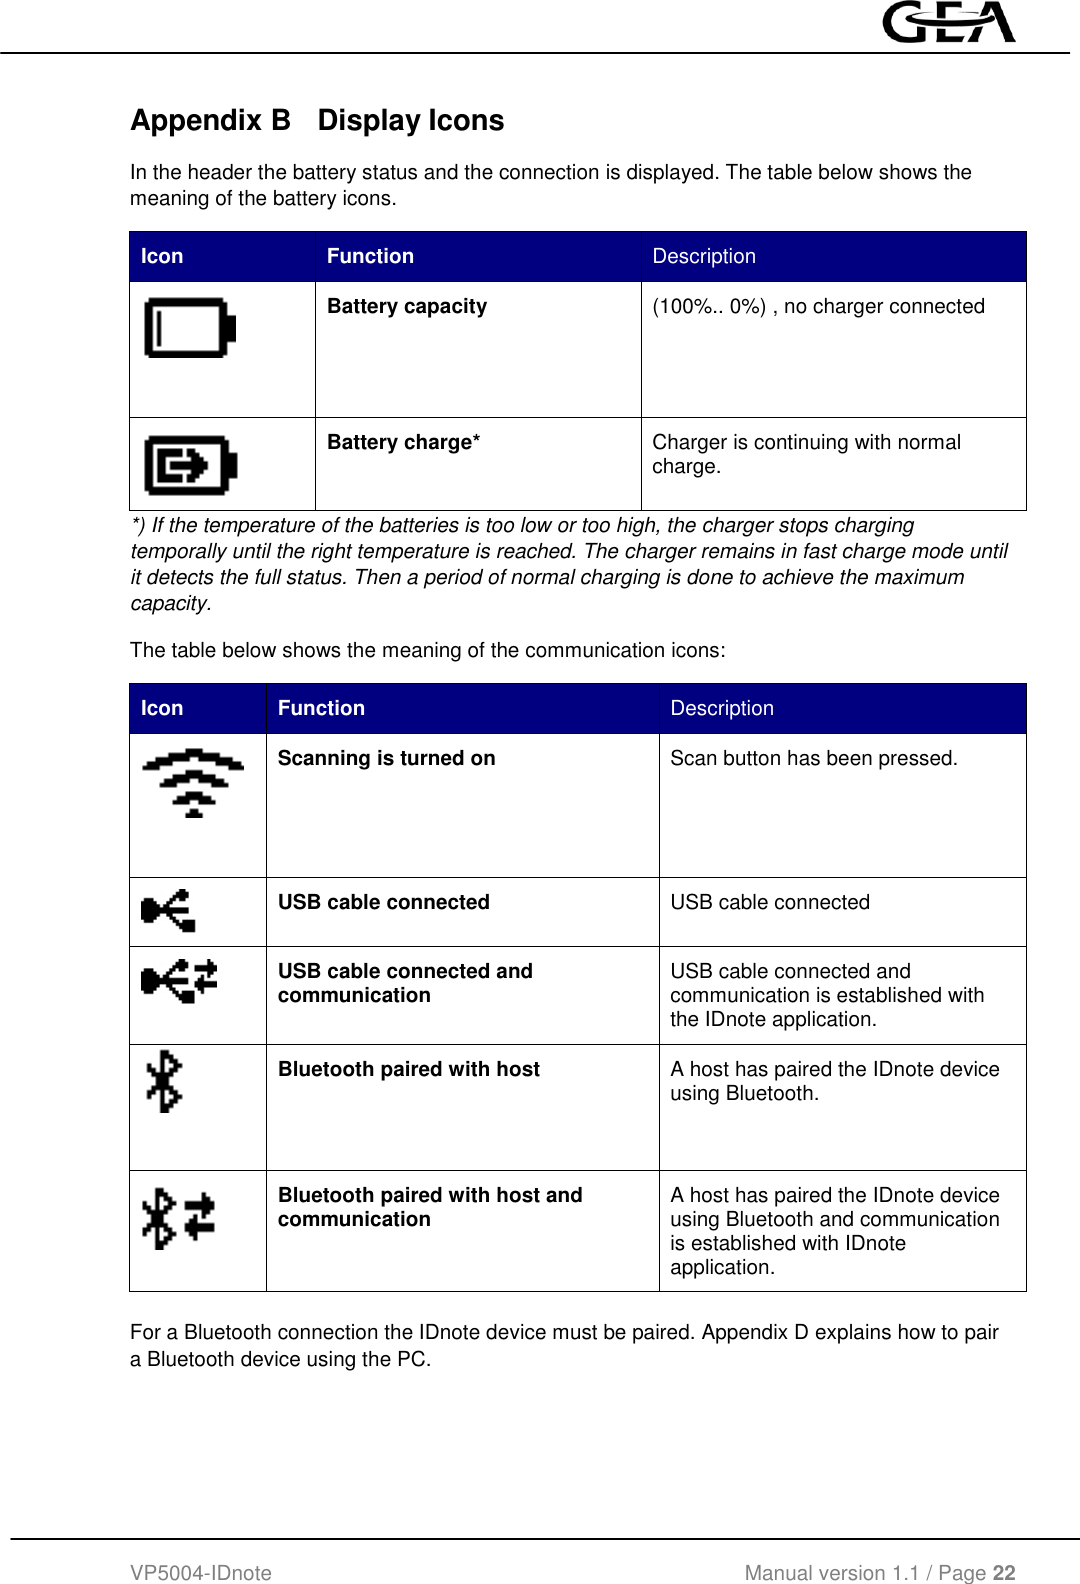  VP5004-IDnote                                             Manual version 1.1 / Page 22  Appendix B  Display Icons In the header the battery status and the connection is displayed. The table below shows the meaning of the battery icons. Icon Function Description   Battery capacity (100%.. 0%) , no charger connected  Battery charge* Charger is continuing with normal charge. *) If the temperature of the batteries is too low or too high, the charger stops charging temporally until the right temperature is reached. The charger remains in fast charge mode until it detects the full status. Then a period of normal charging is done to achieve the maximum capacity. The table below shows the meaning of the communication icons: Icon Function Description   Scanning is turned on Scan button has been pressed.  USB cable connected USB cable connected  USB cable connected and communication USB cable connected and communication is established with the IDnote application.   Bluetooth paired with host A host has paired the IDnote device using Bluetooth.  Bluetooth paired with host and communication A host has paired the IDnote device using Bluetooth and communication is established with IDnote application.  For a Bluetooth connection the IDnote device must be paired. Appendix D explains how to pair a Bluetooth device using the PC.  